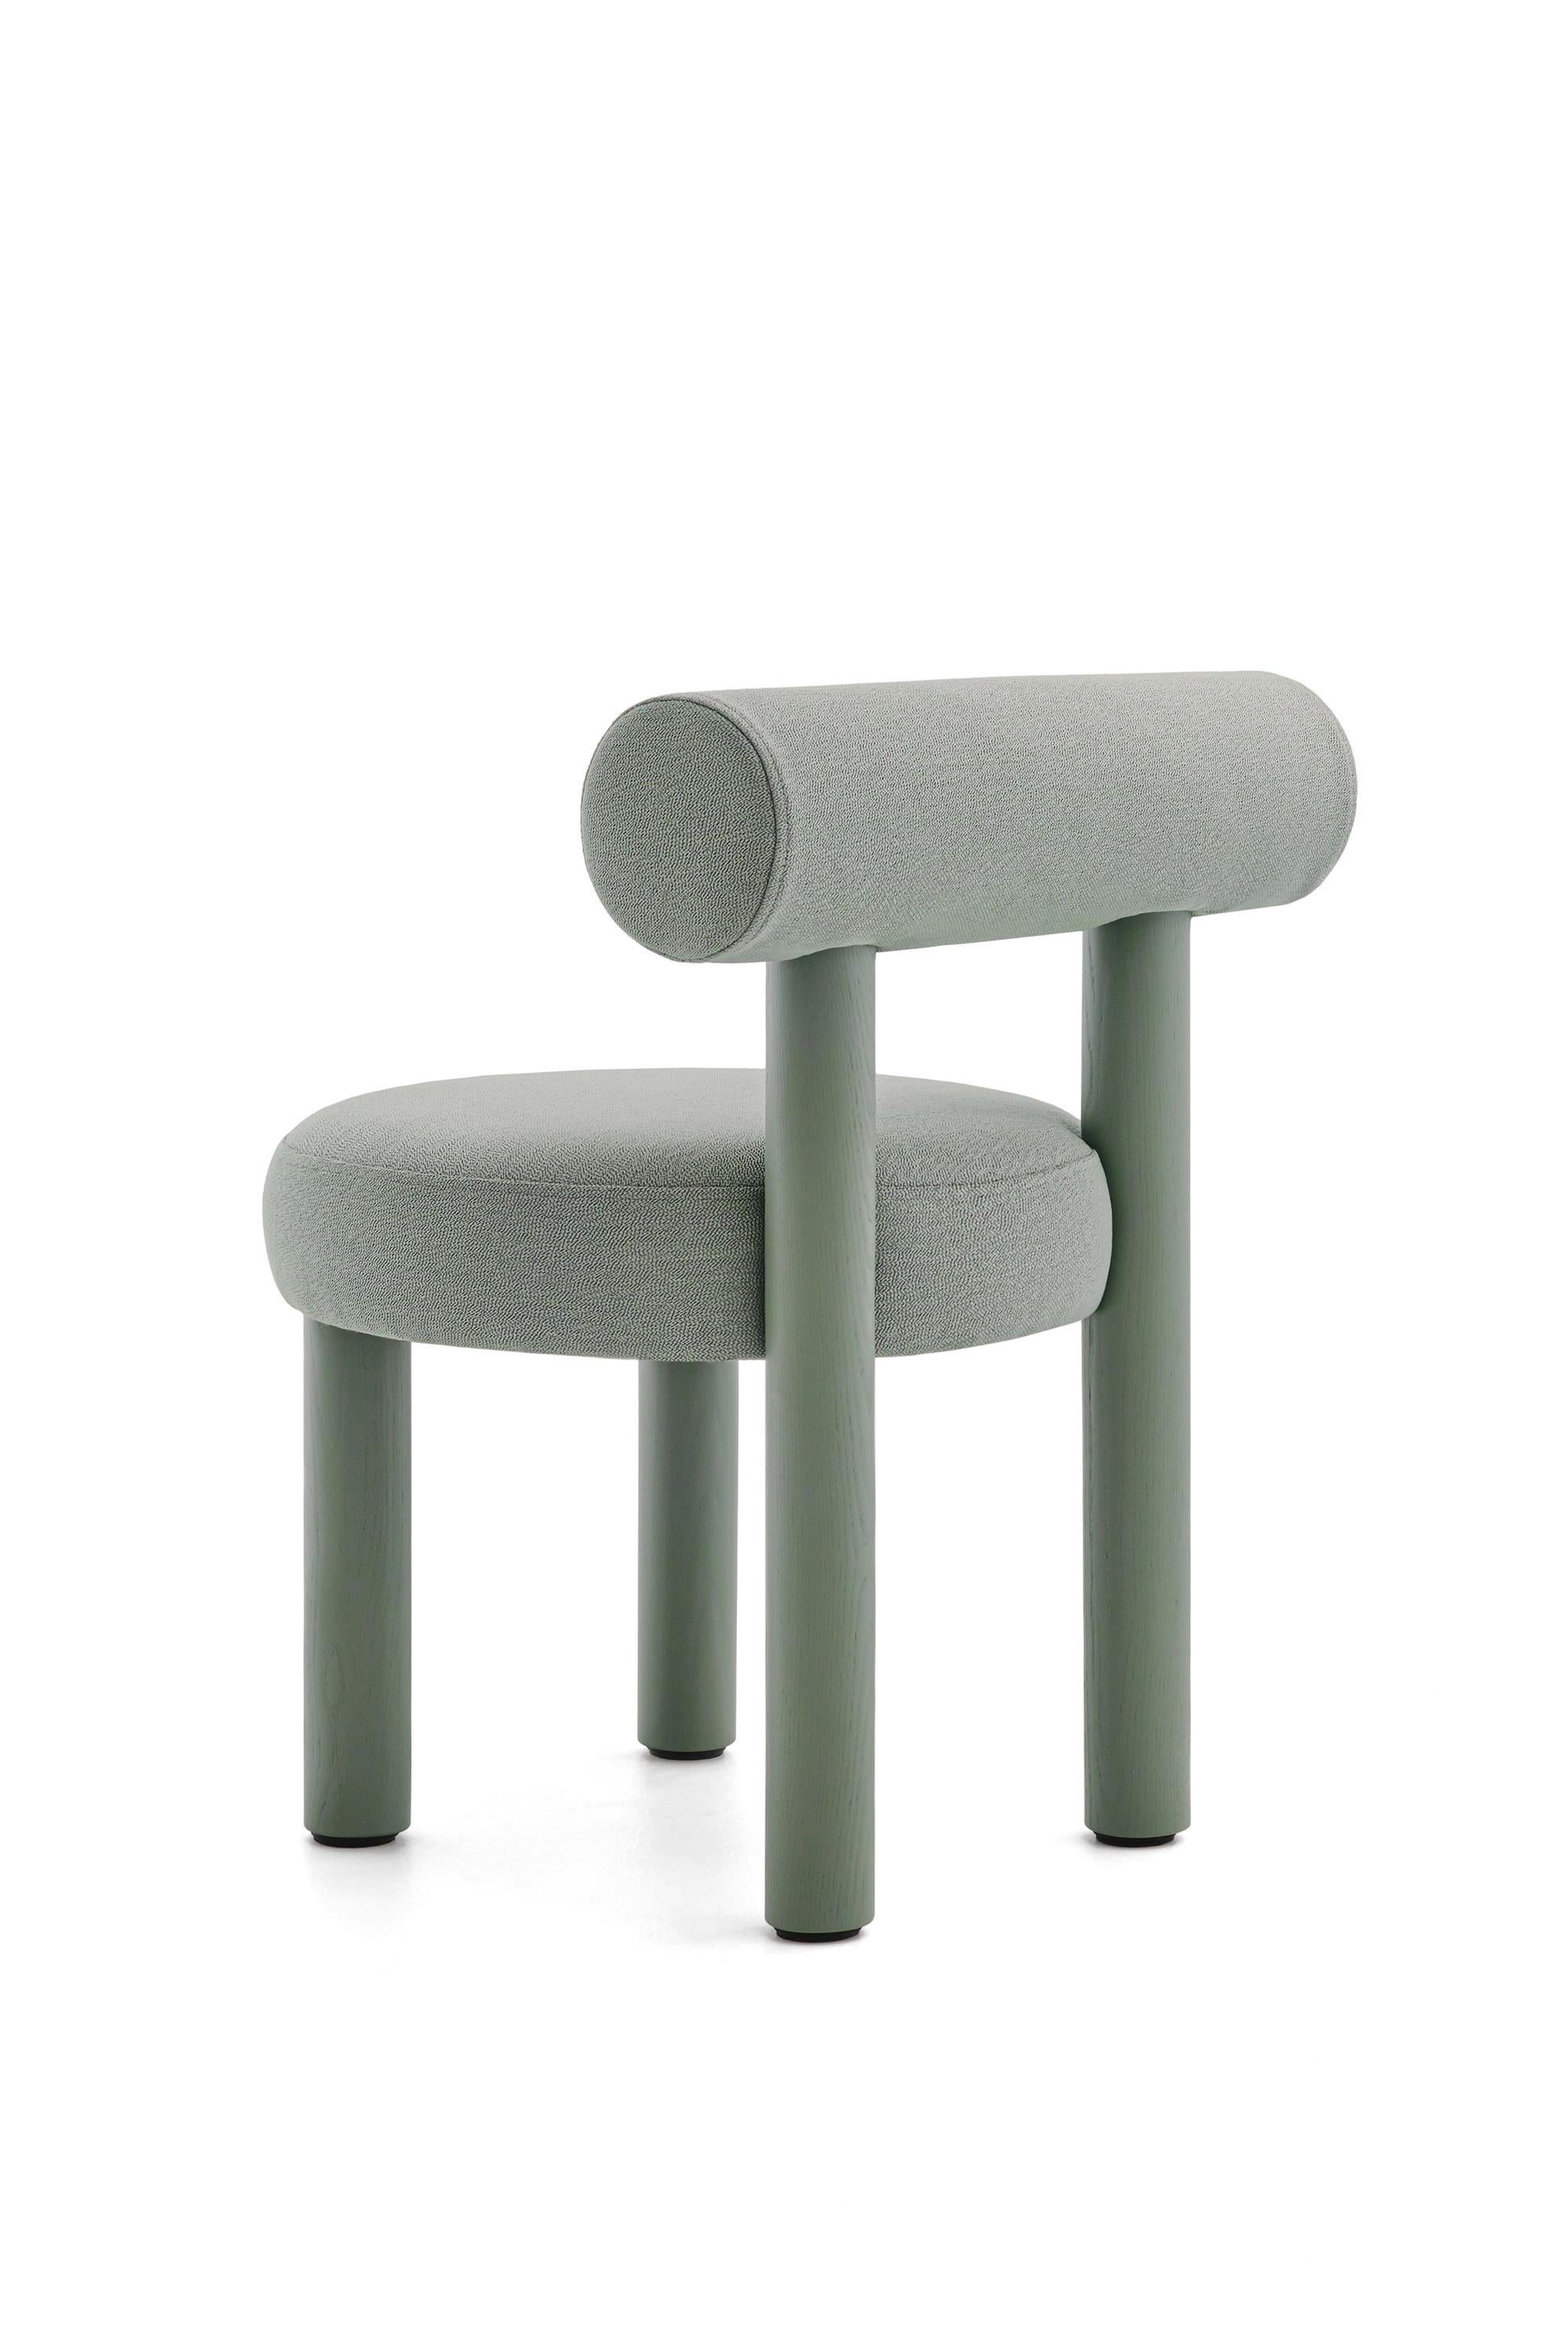 Contemporary Modern Dining Chair Gropius CS2 with Wooden Legs Painted in RAL color by Noom